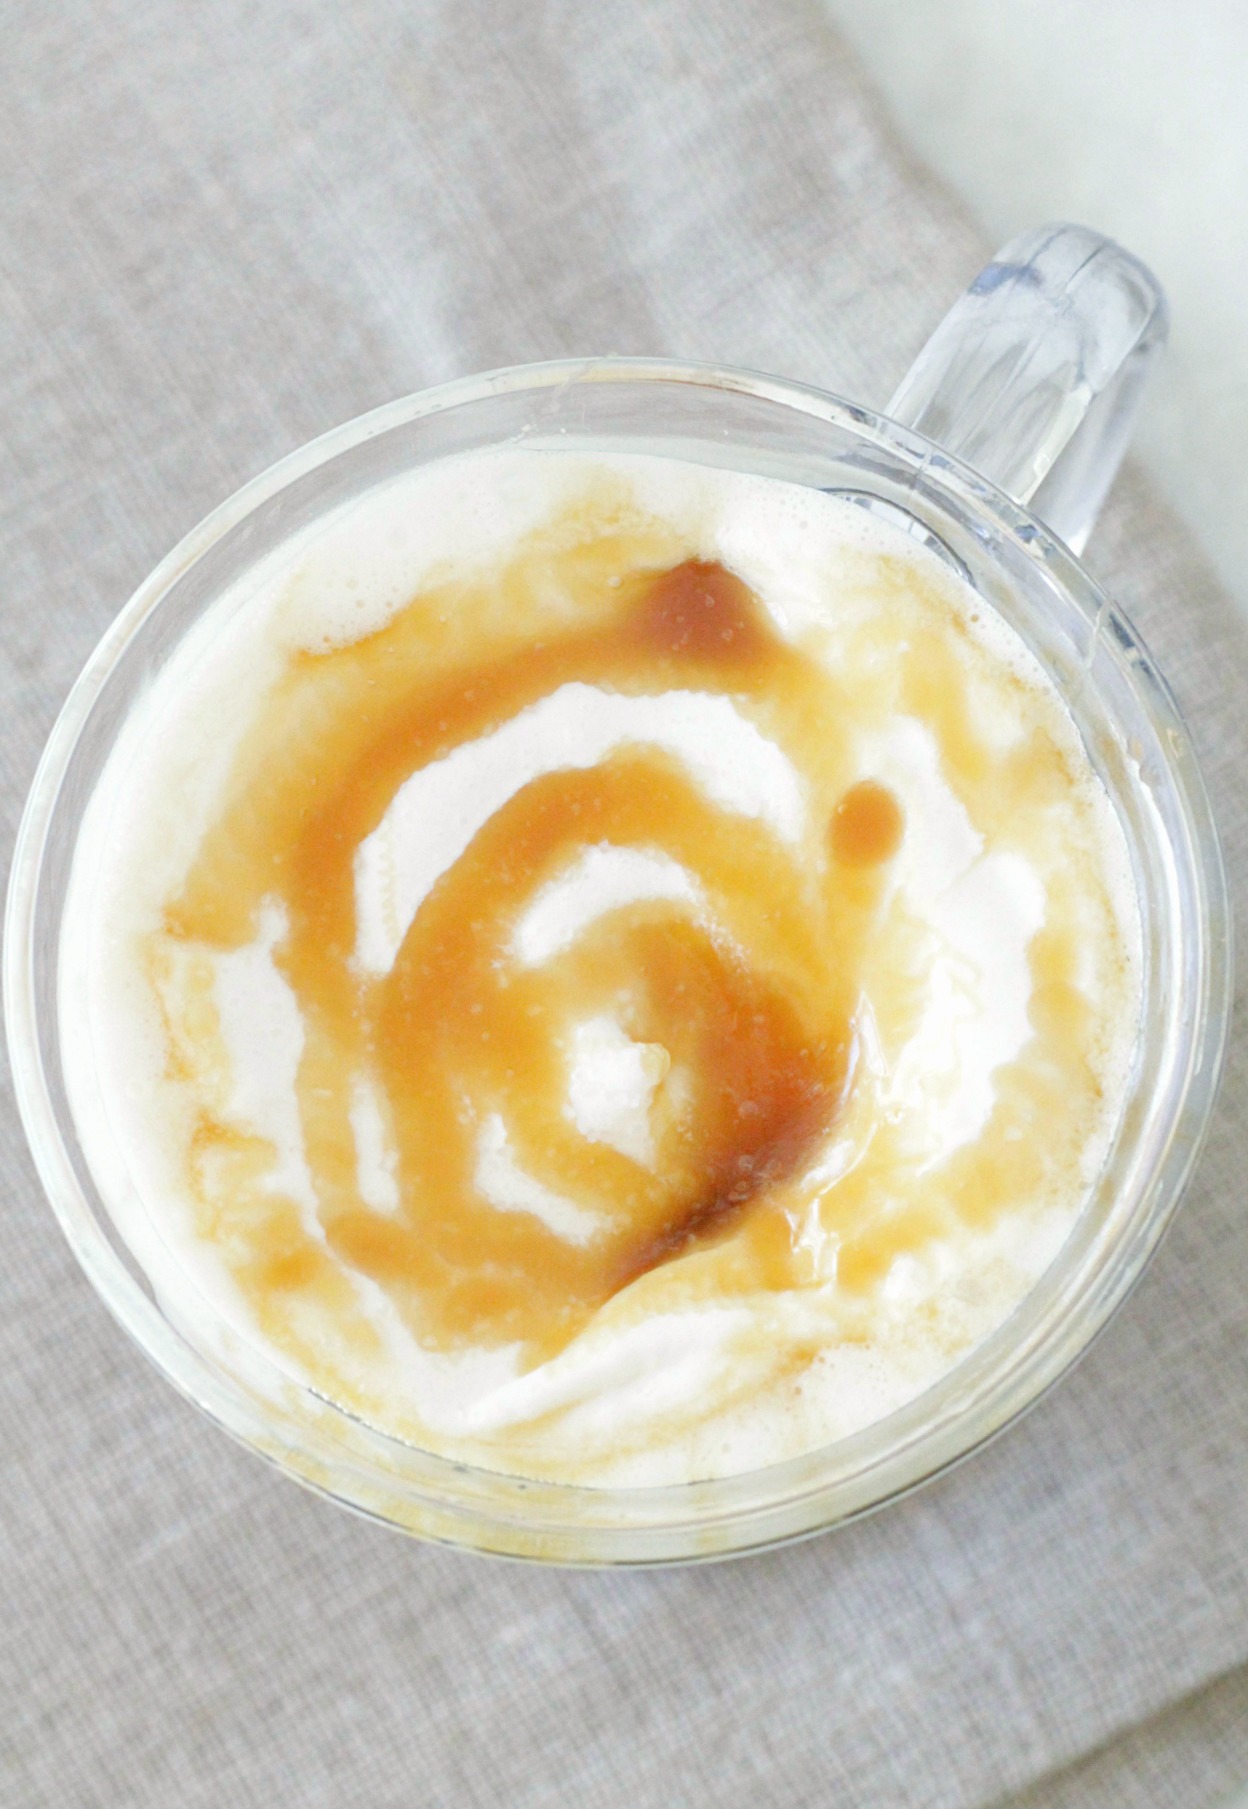 coffee station ideas top view of coffee with whipped topping and caramel sauce